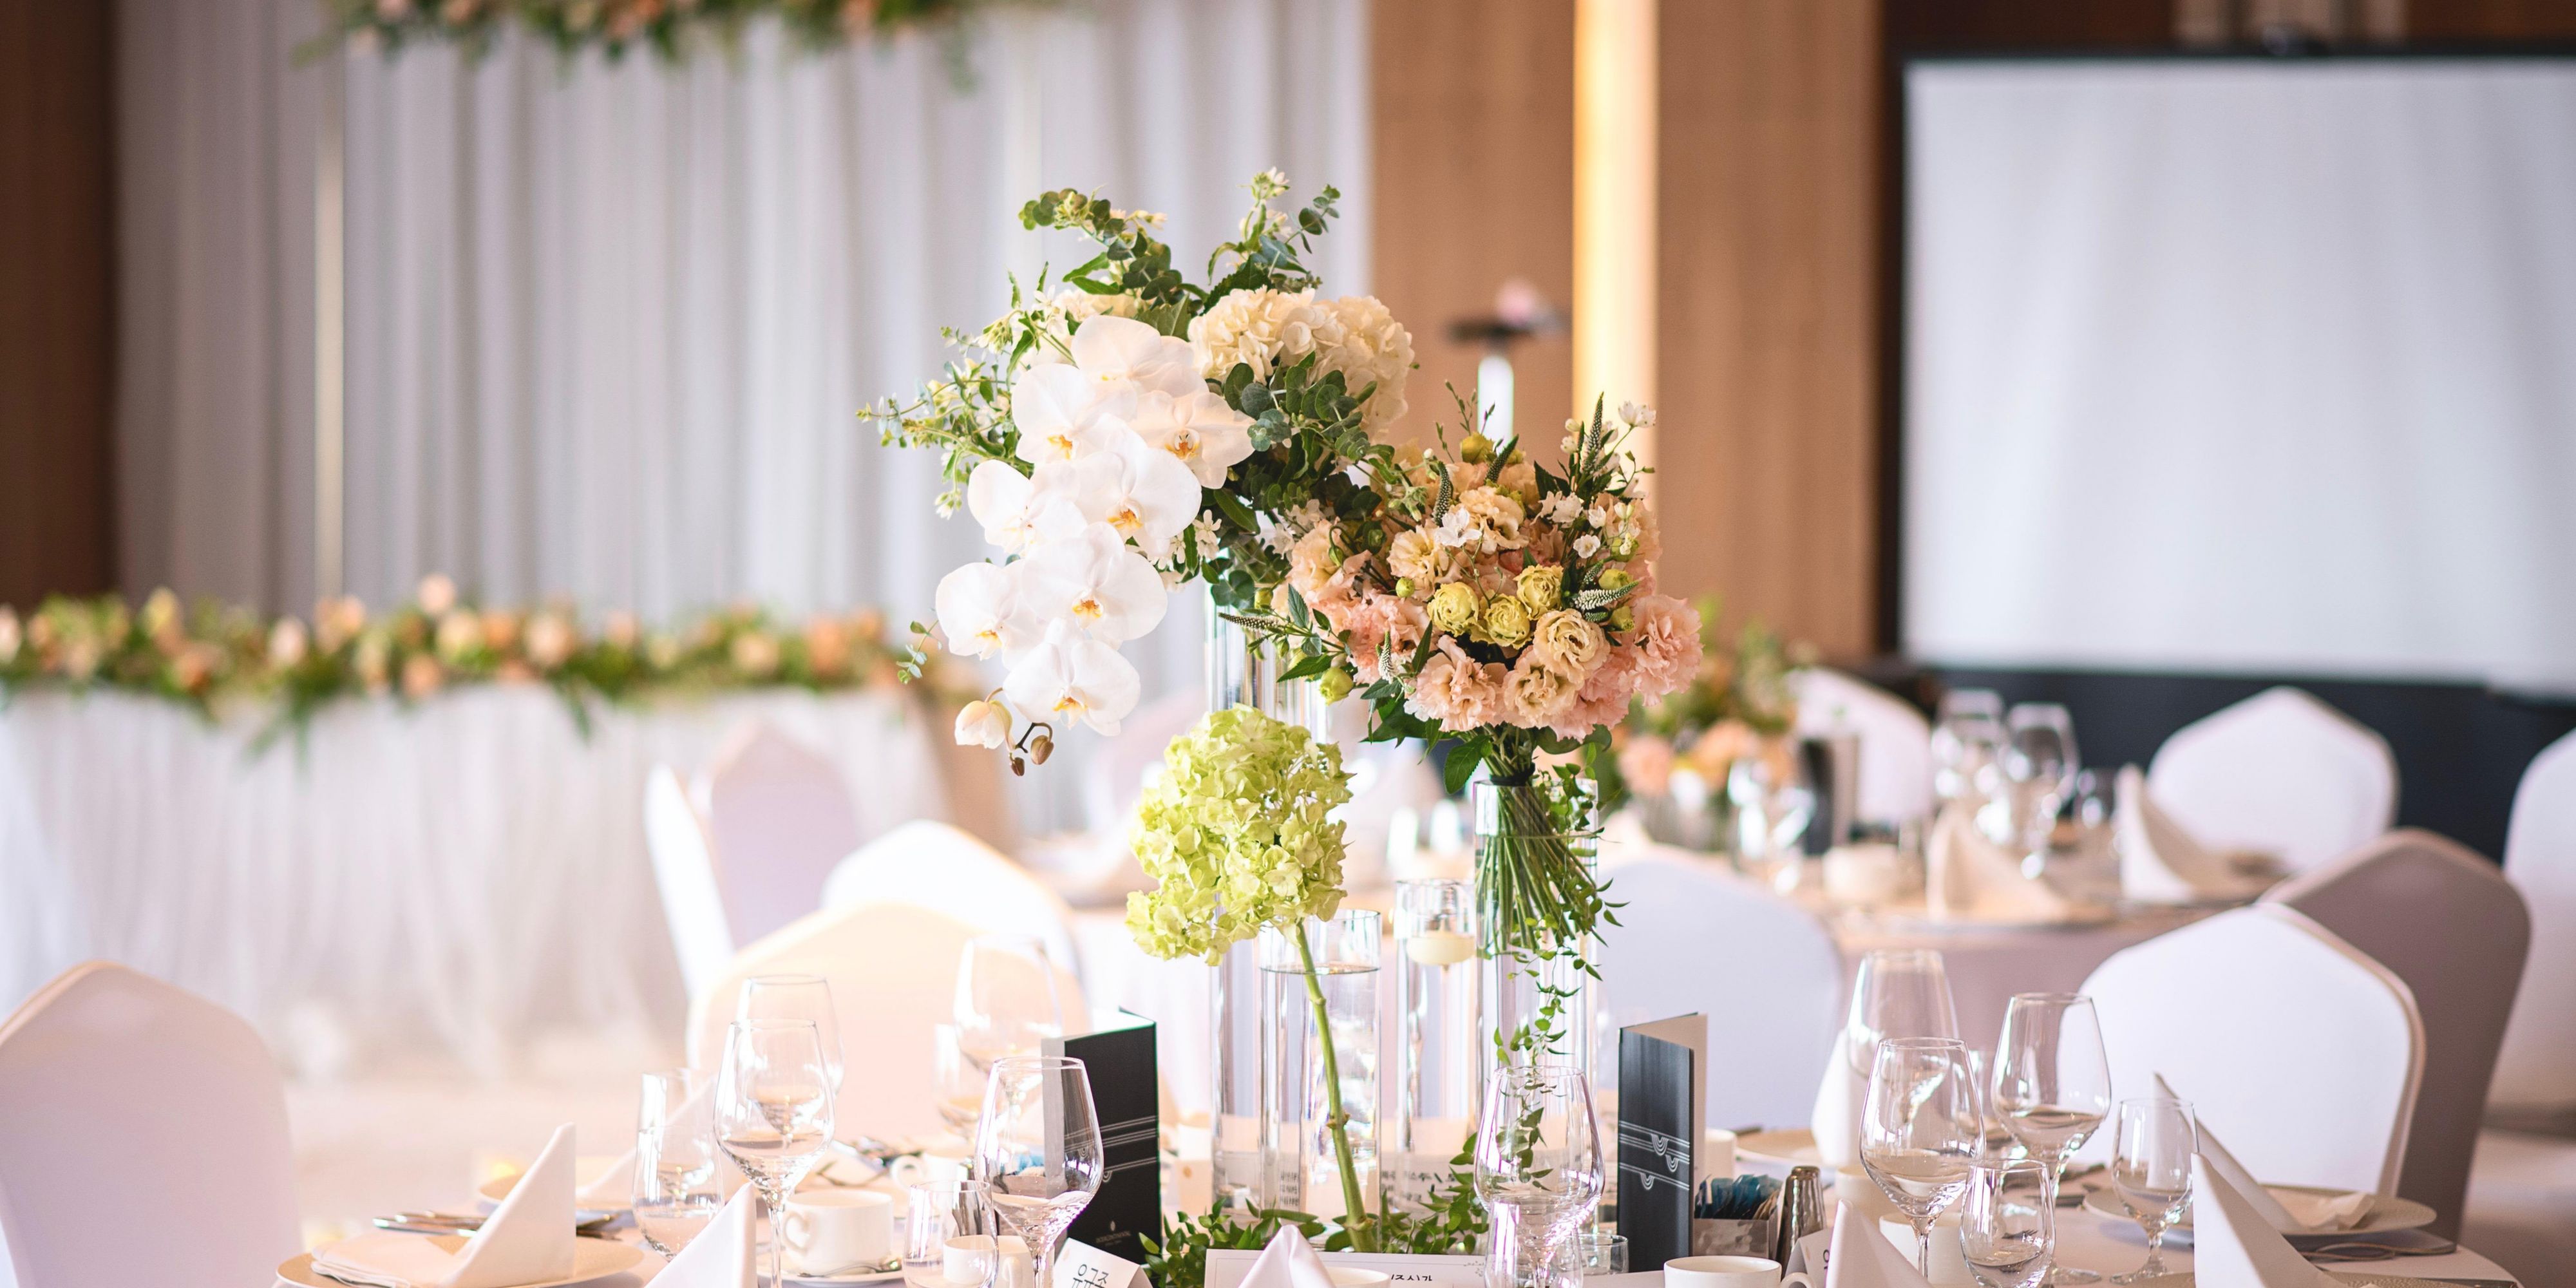 Make your wedding the best day of your life with the exquisite quality and
service of InterContinental Seoul COEX.